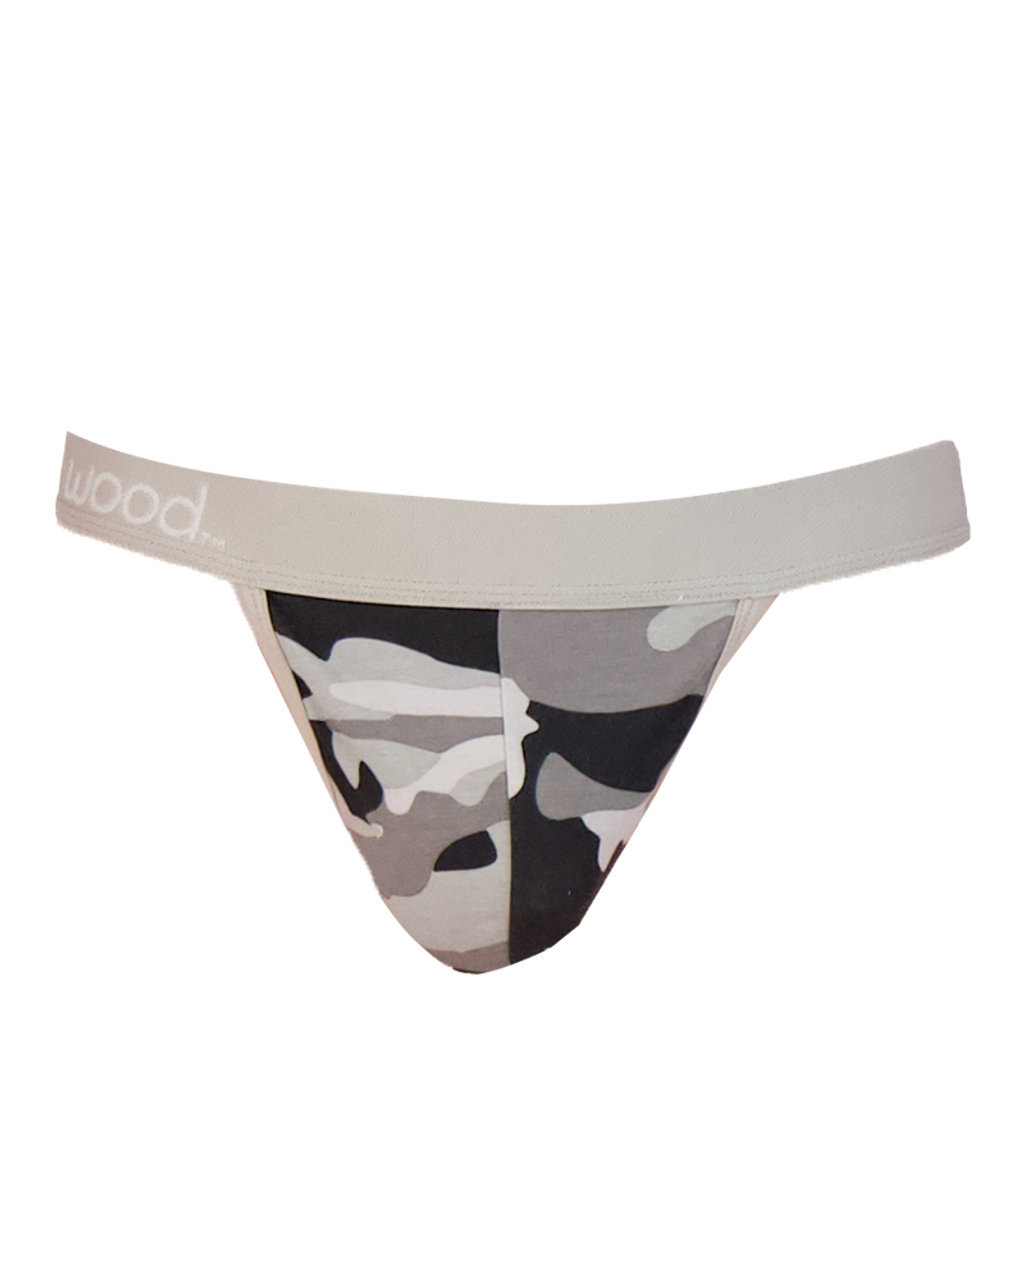 Thong in Ghost Camo by Wood Underwear